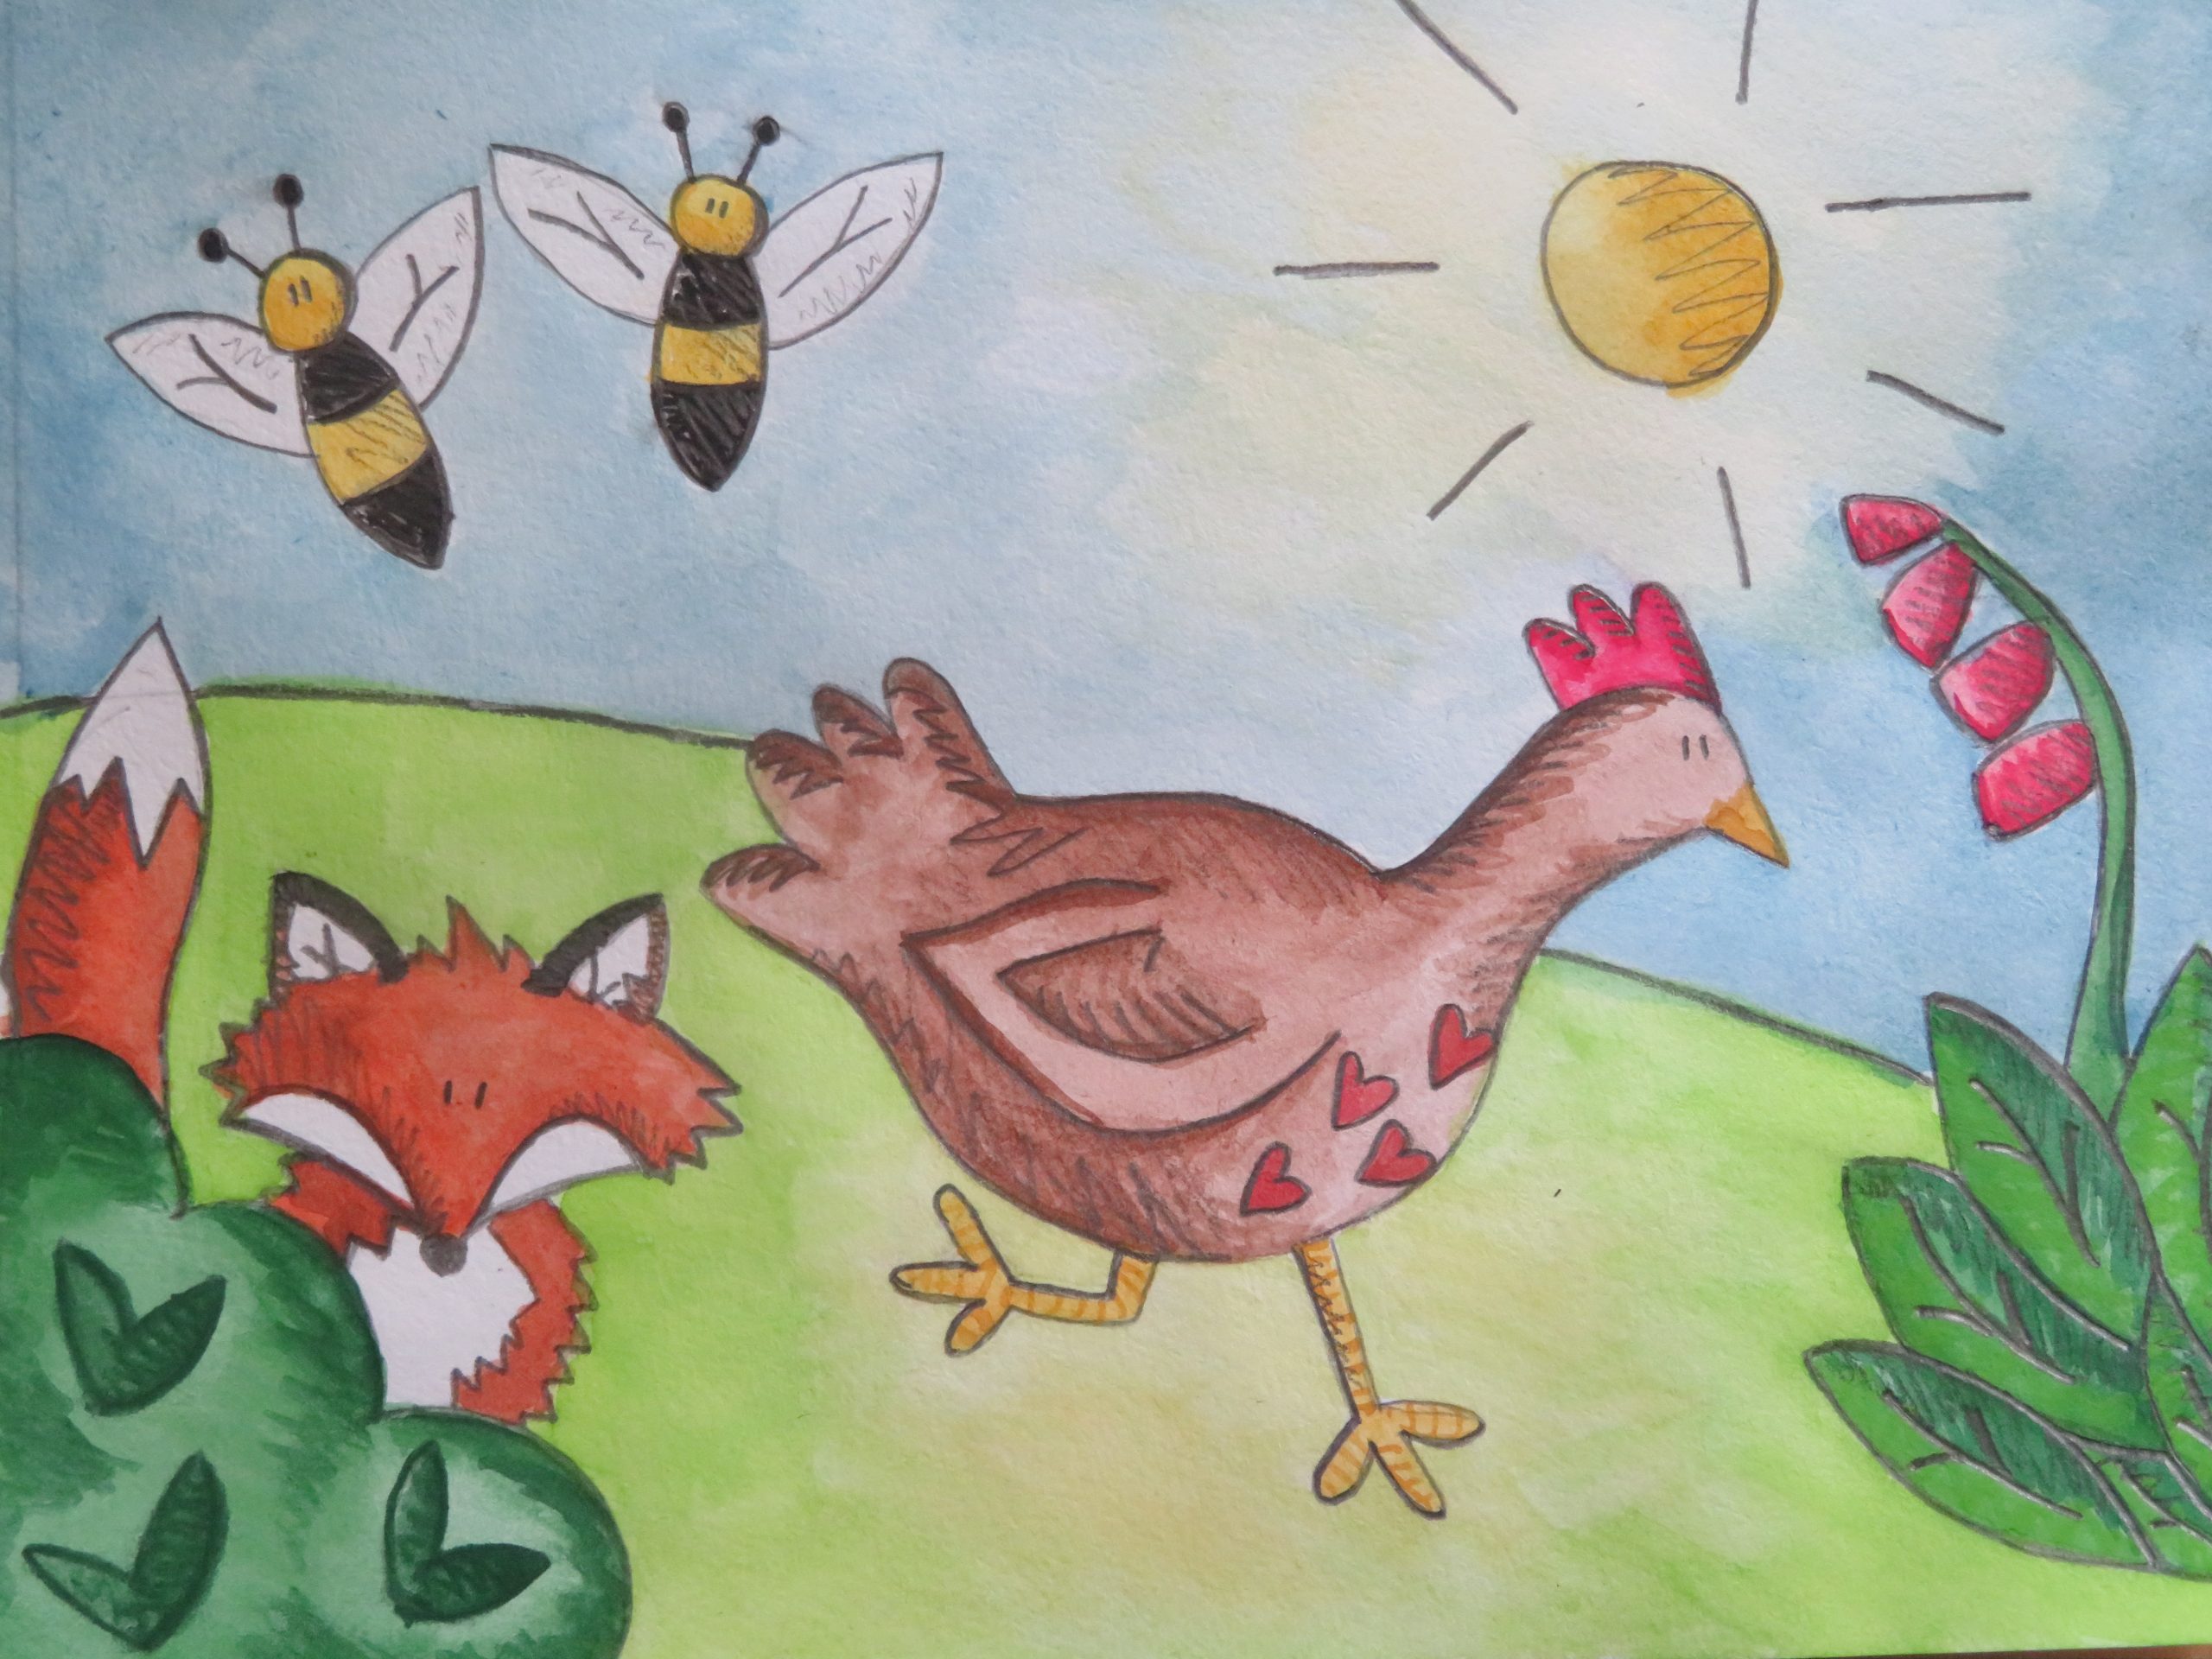 image drawn in pencil crayon of a chicken running on grass on a sunny day, bees, flowers and a fox are there too